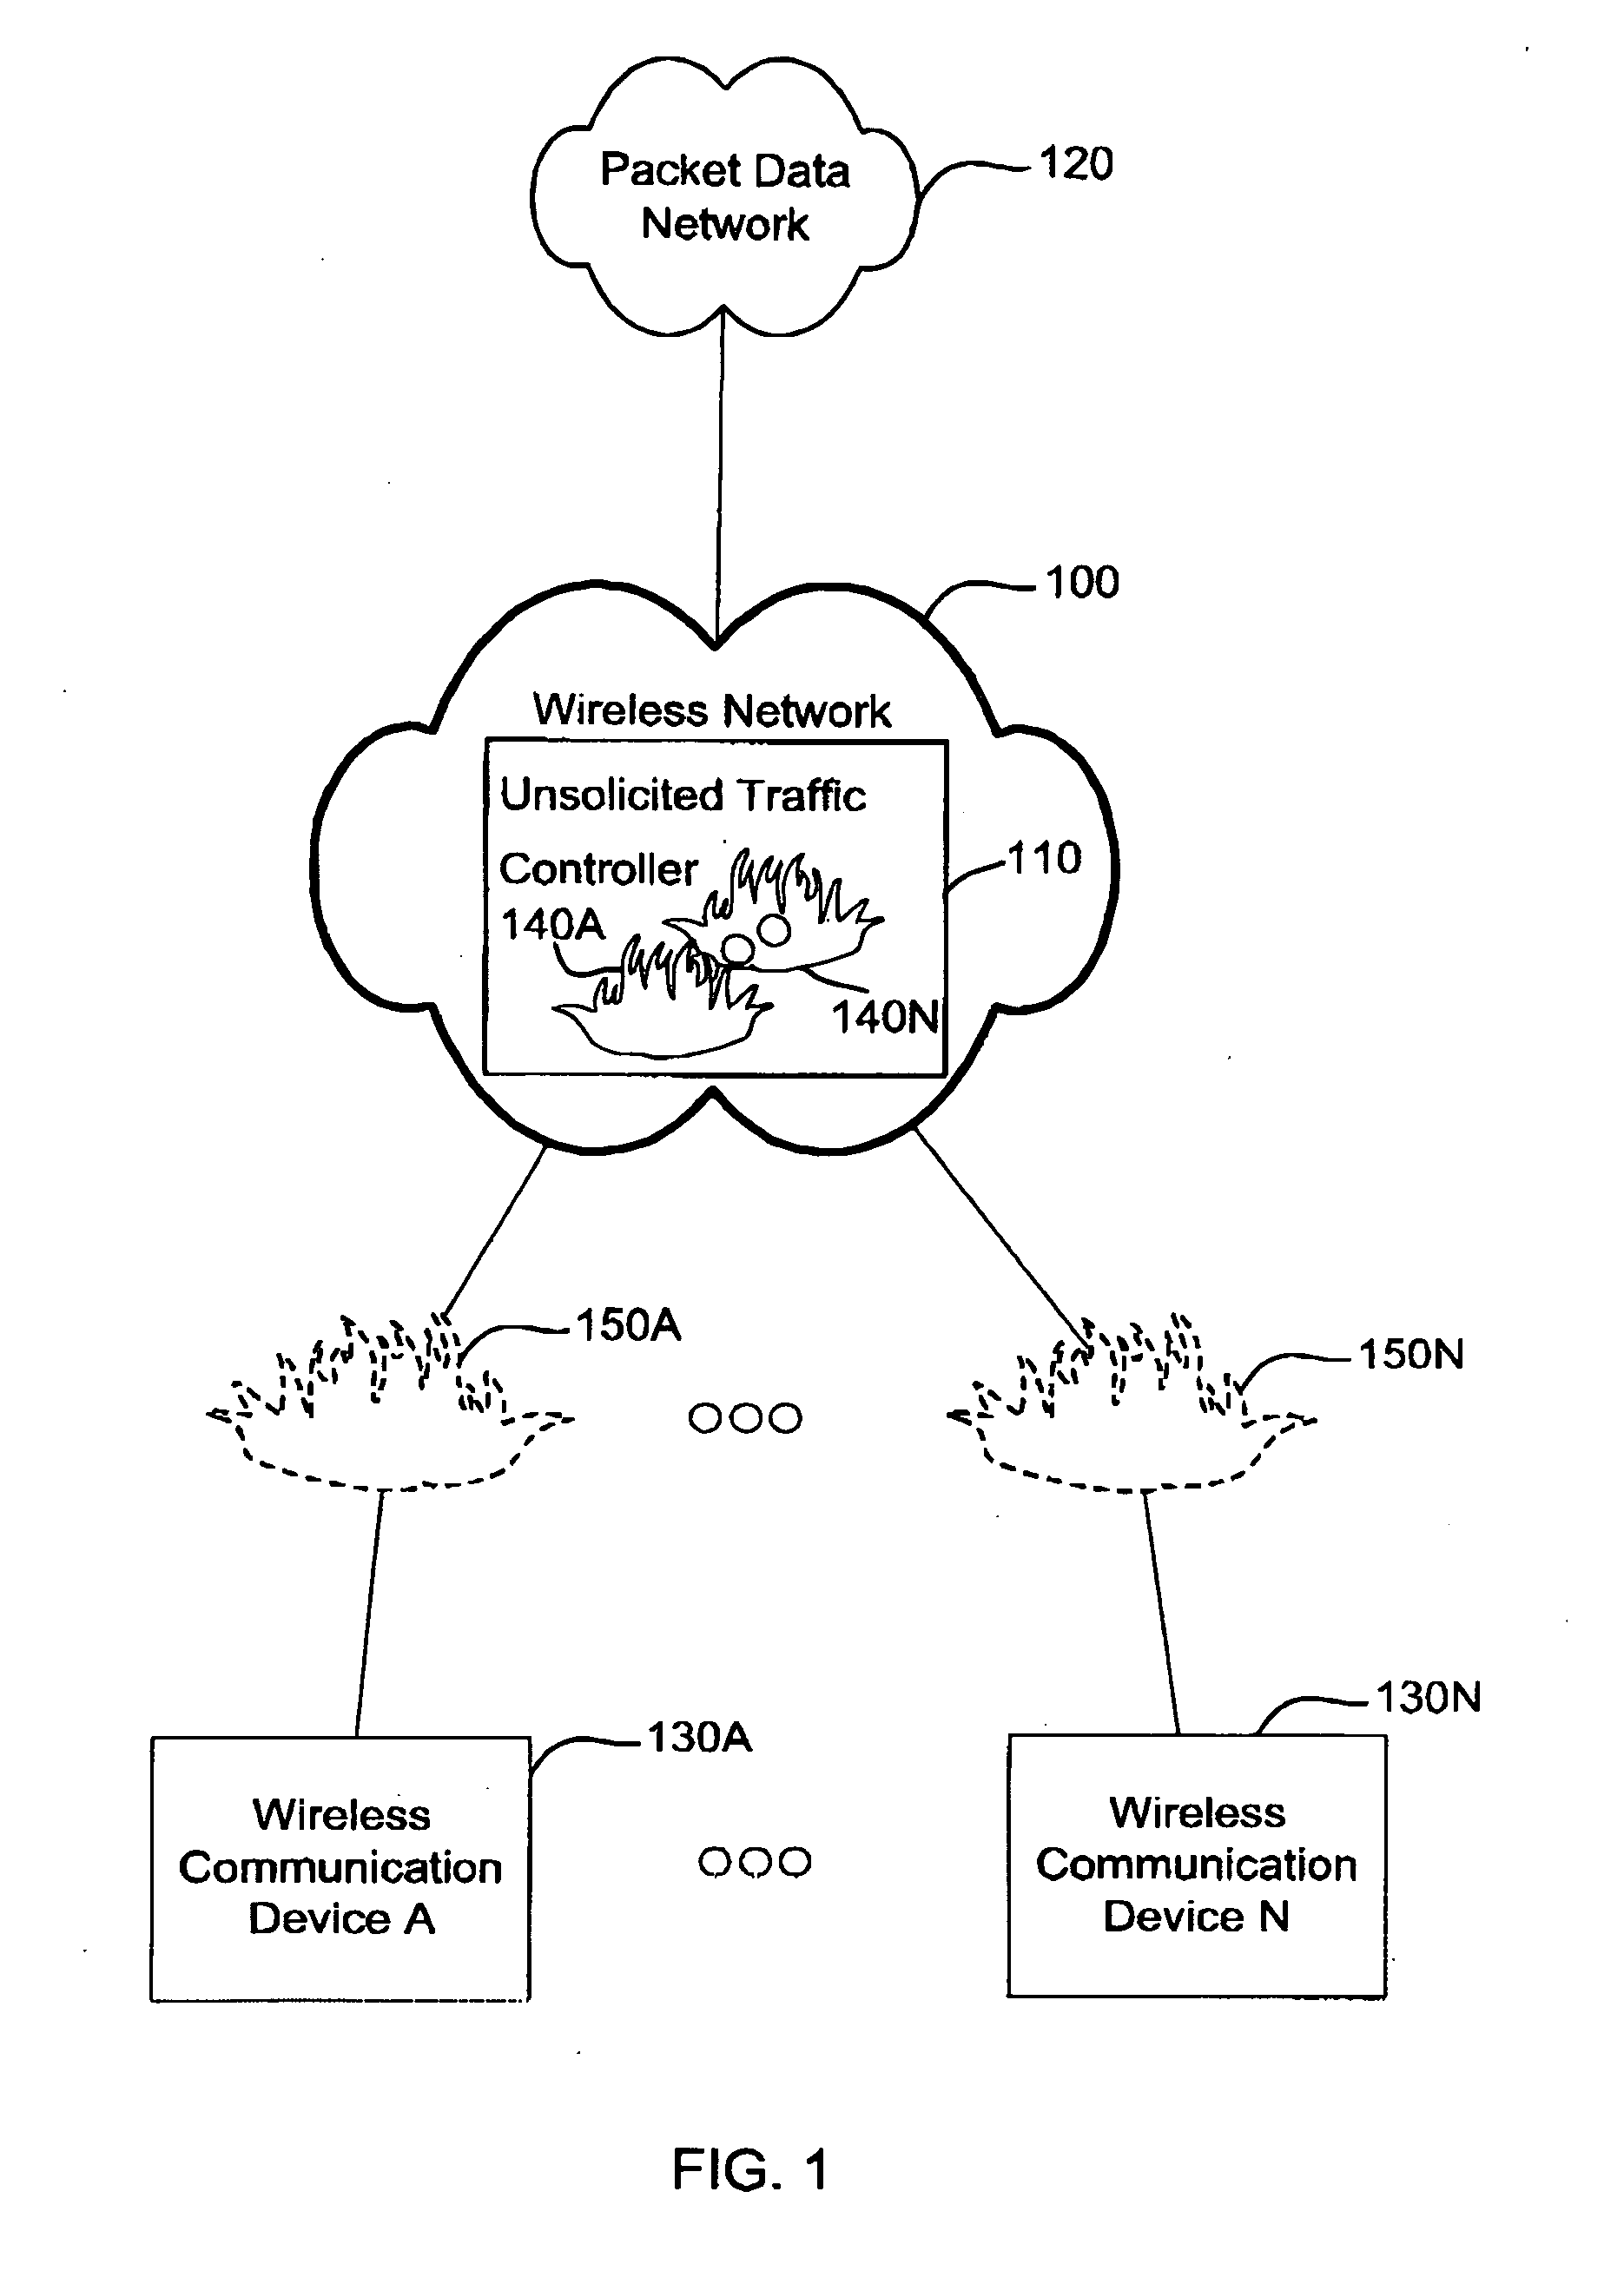 Apparatus and method of controlling unsolicited traffic destined to a wireless communication device